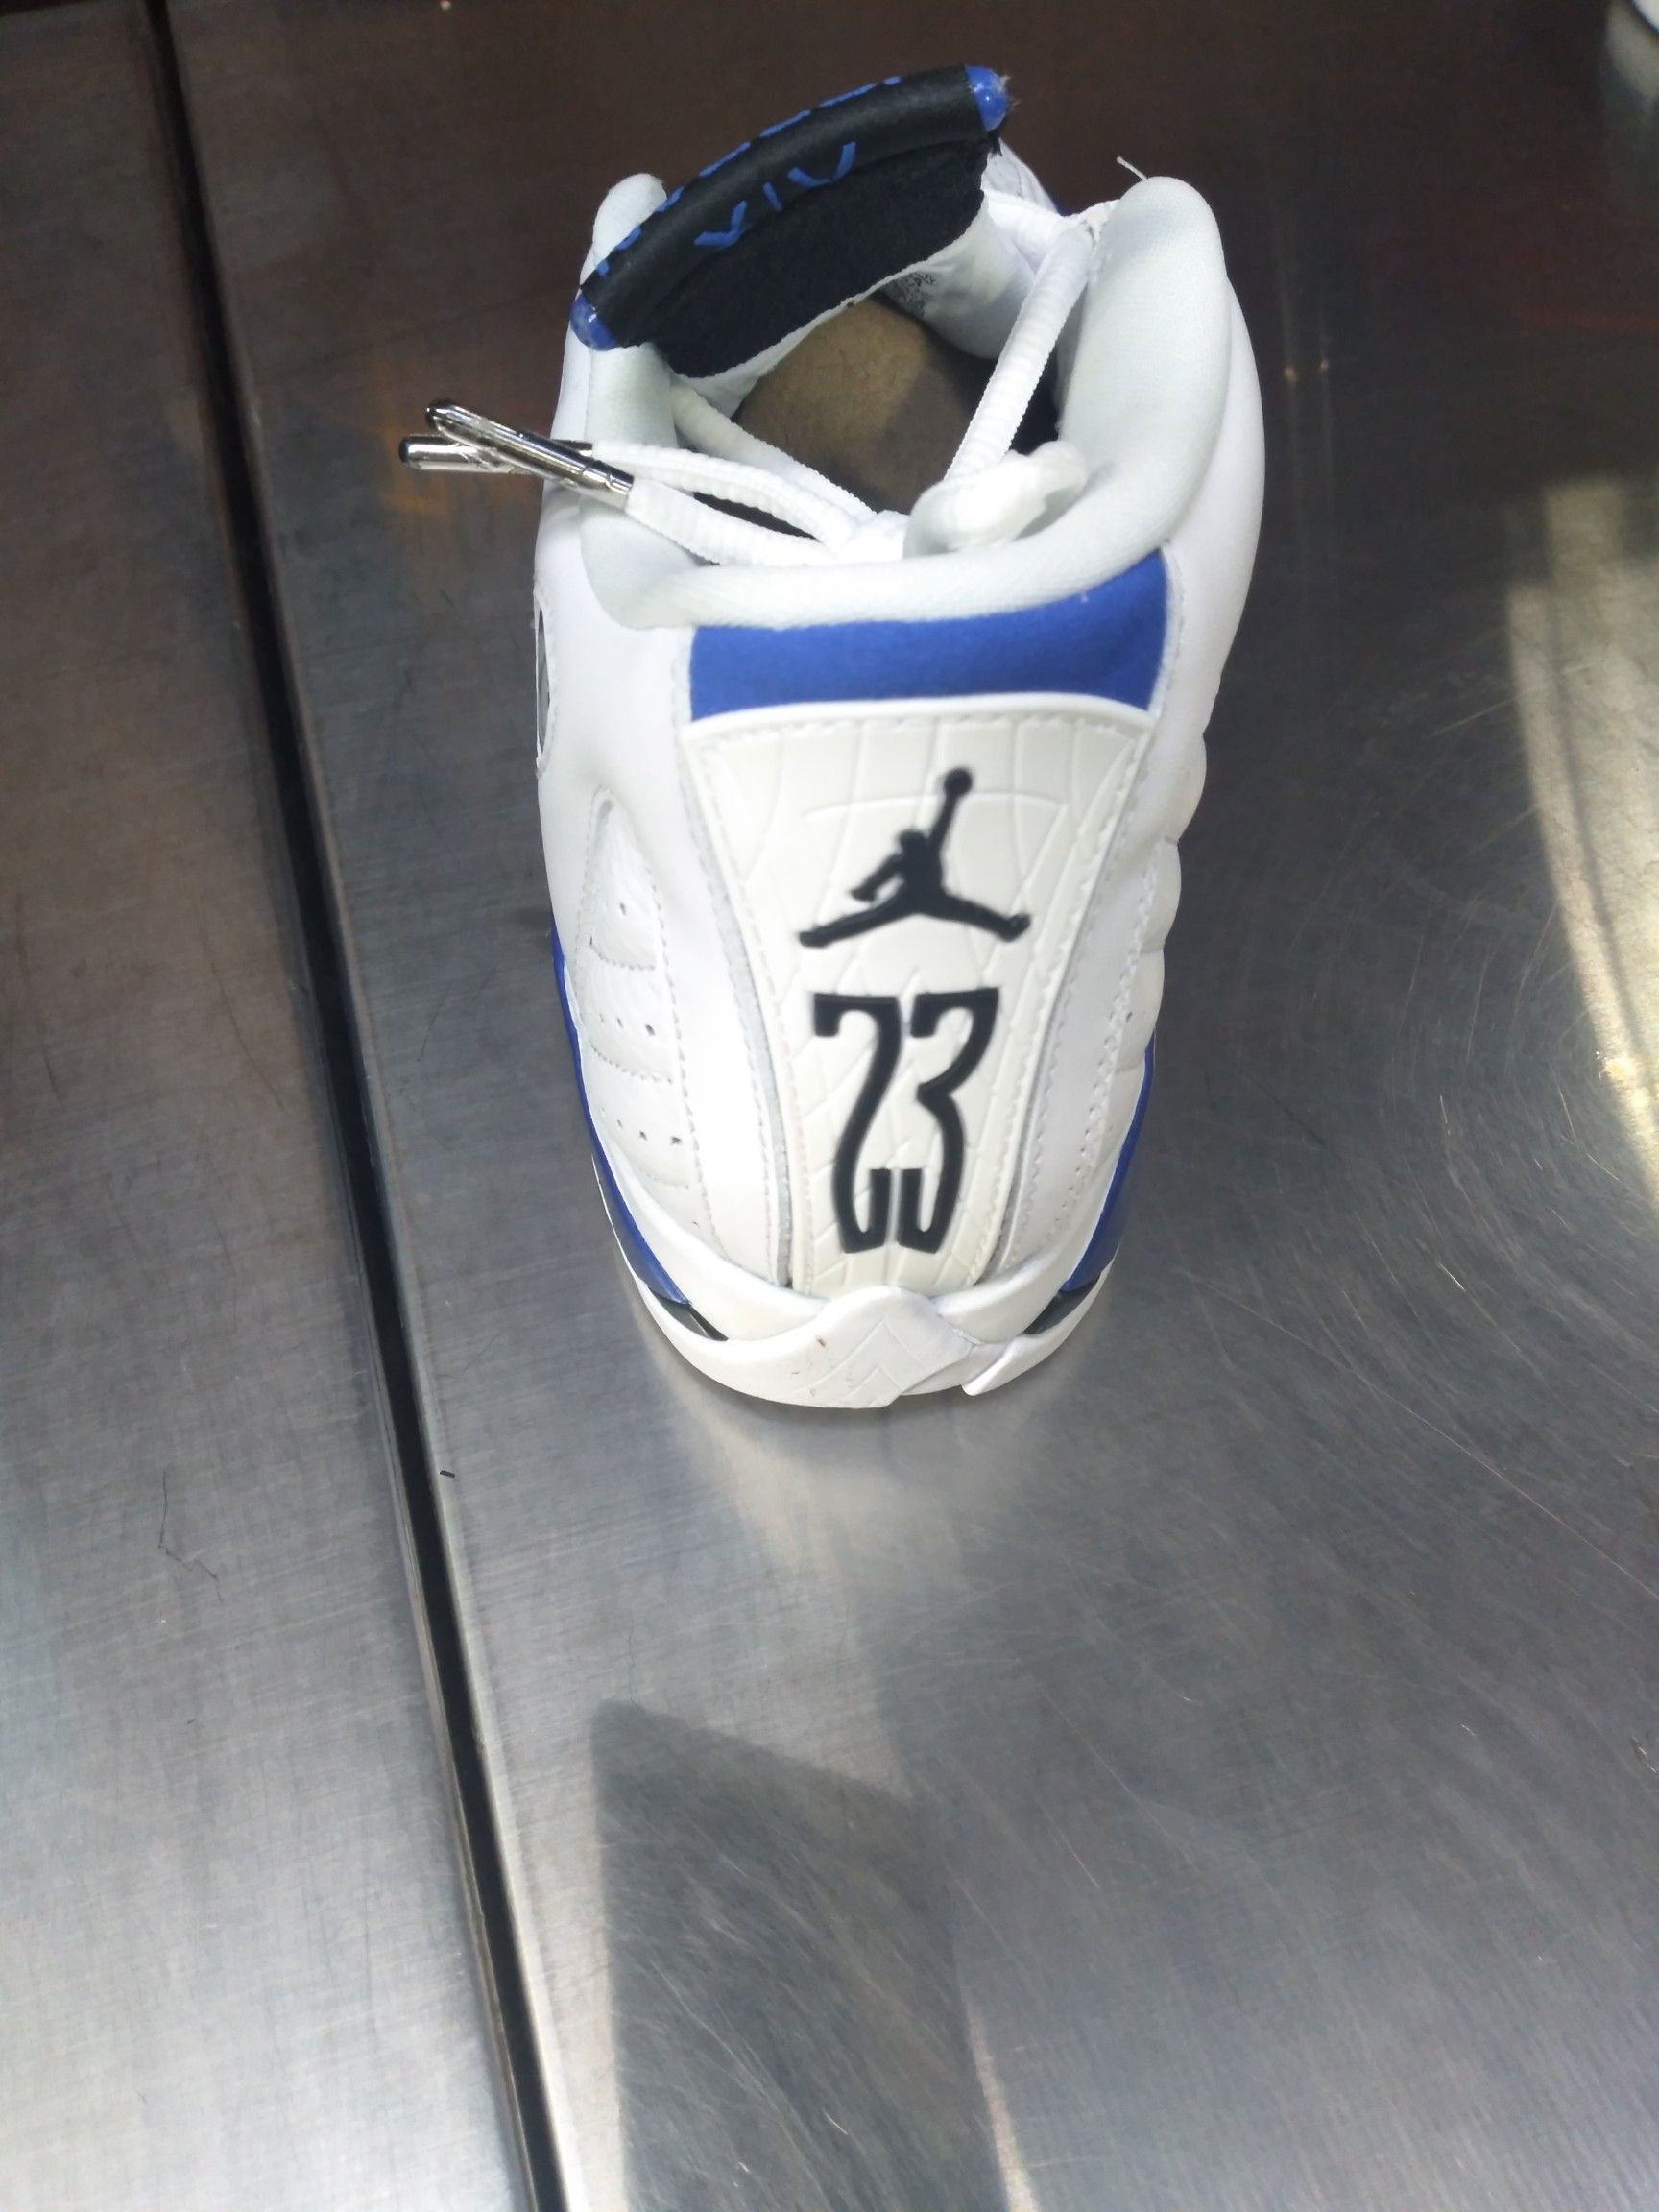 New Air Jordan retro 14 blue/white sz.6.5.. available now.. but not in stores yet